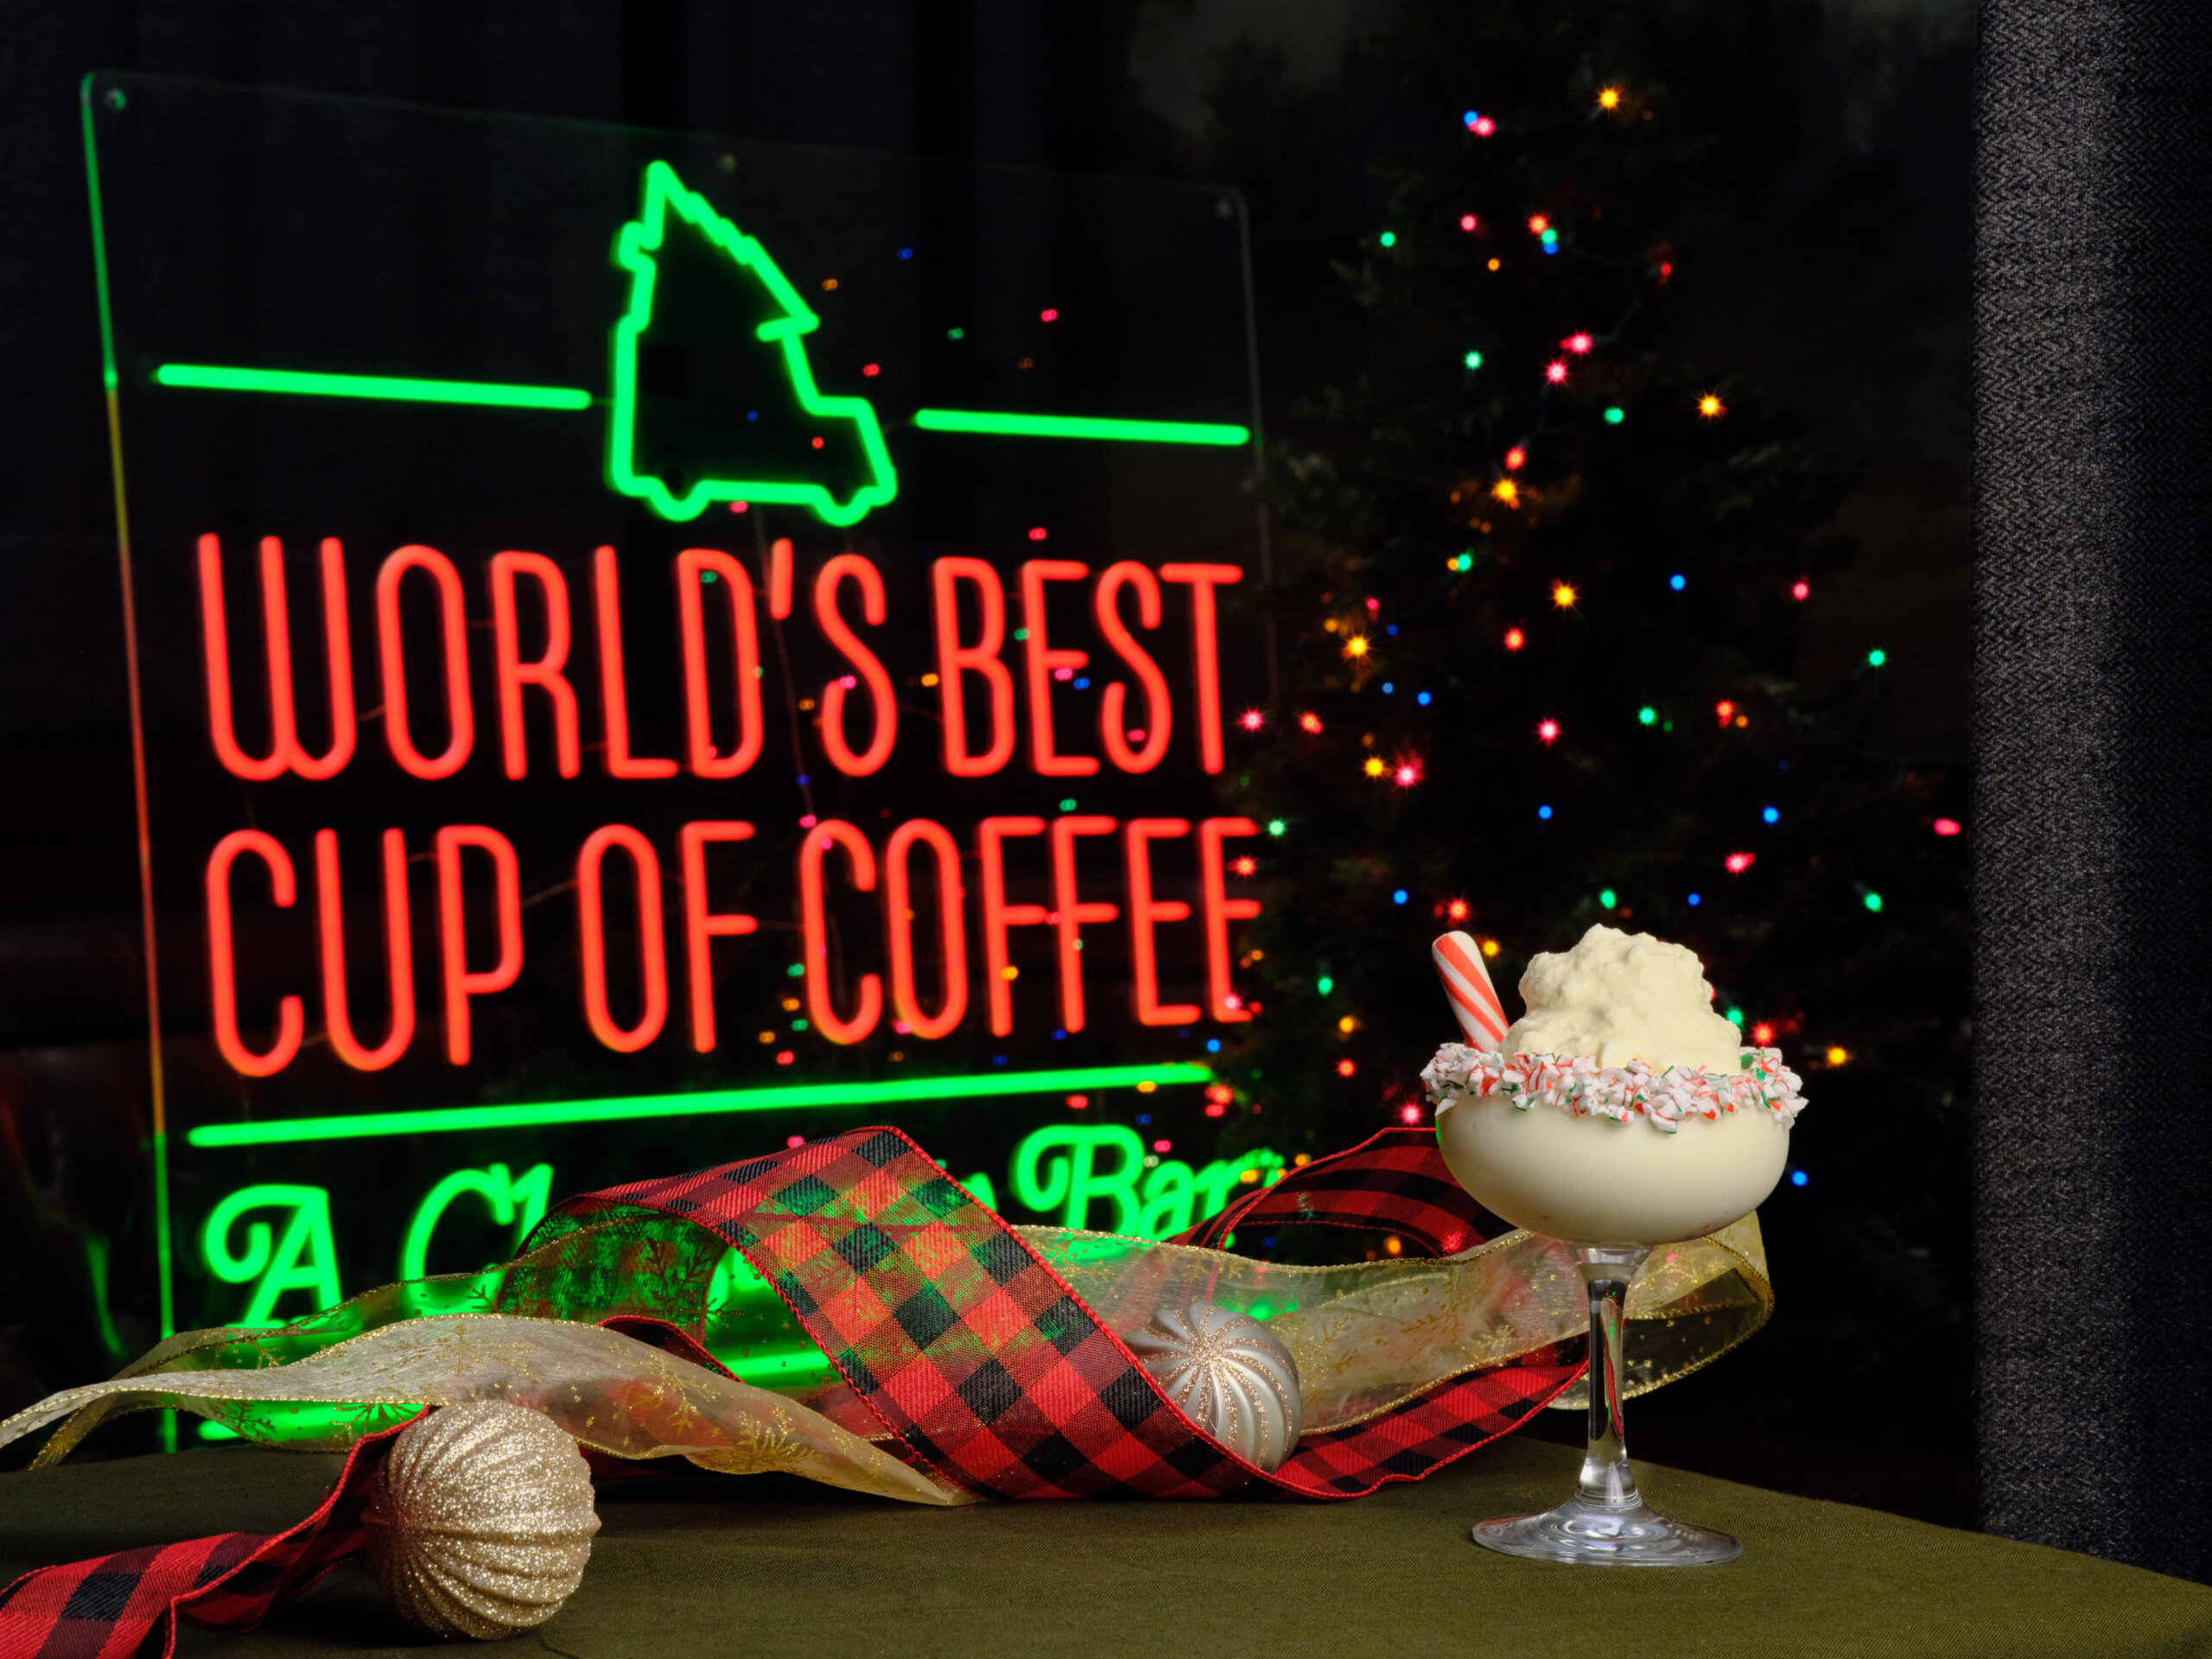 Christmas Pop-Up Bar Downtown Franklin_Candy Cane Forrest, McGavock’s Coffee & Provisions - World’s Best Cup of Coffee Bar.